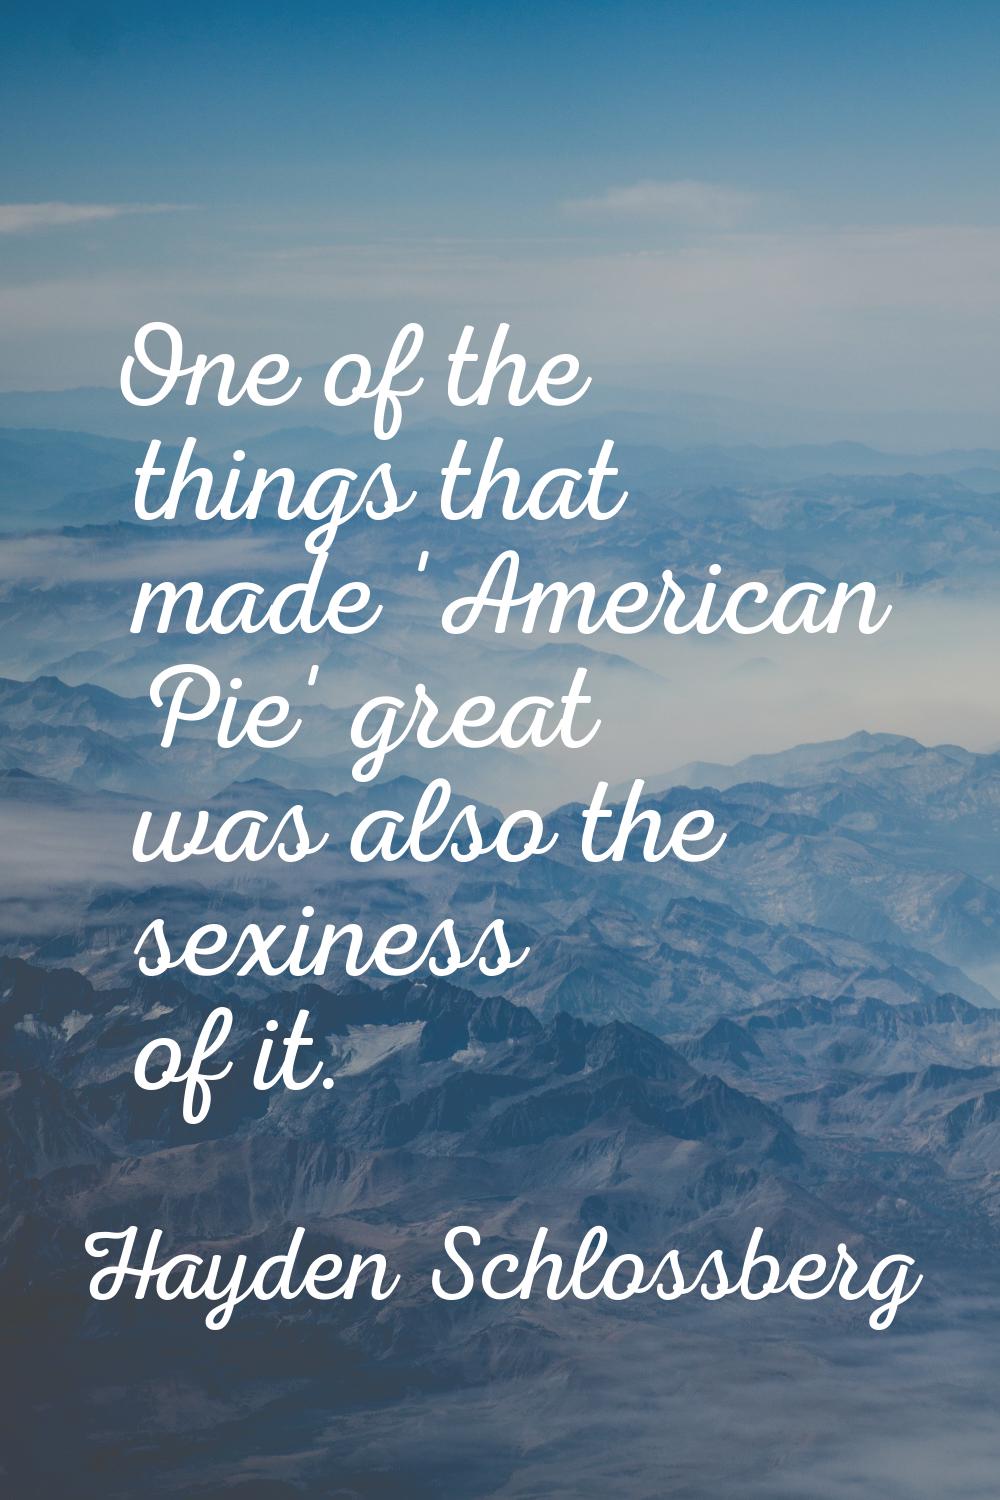 One of the things that made 'American Pie' great was also the sexiness of it.